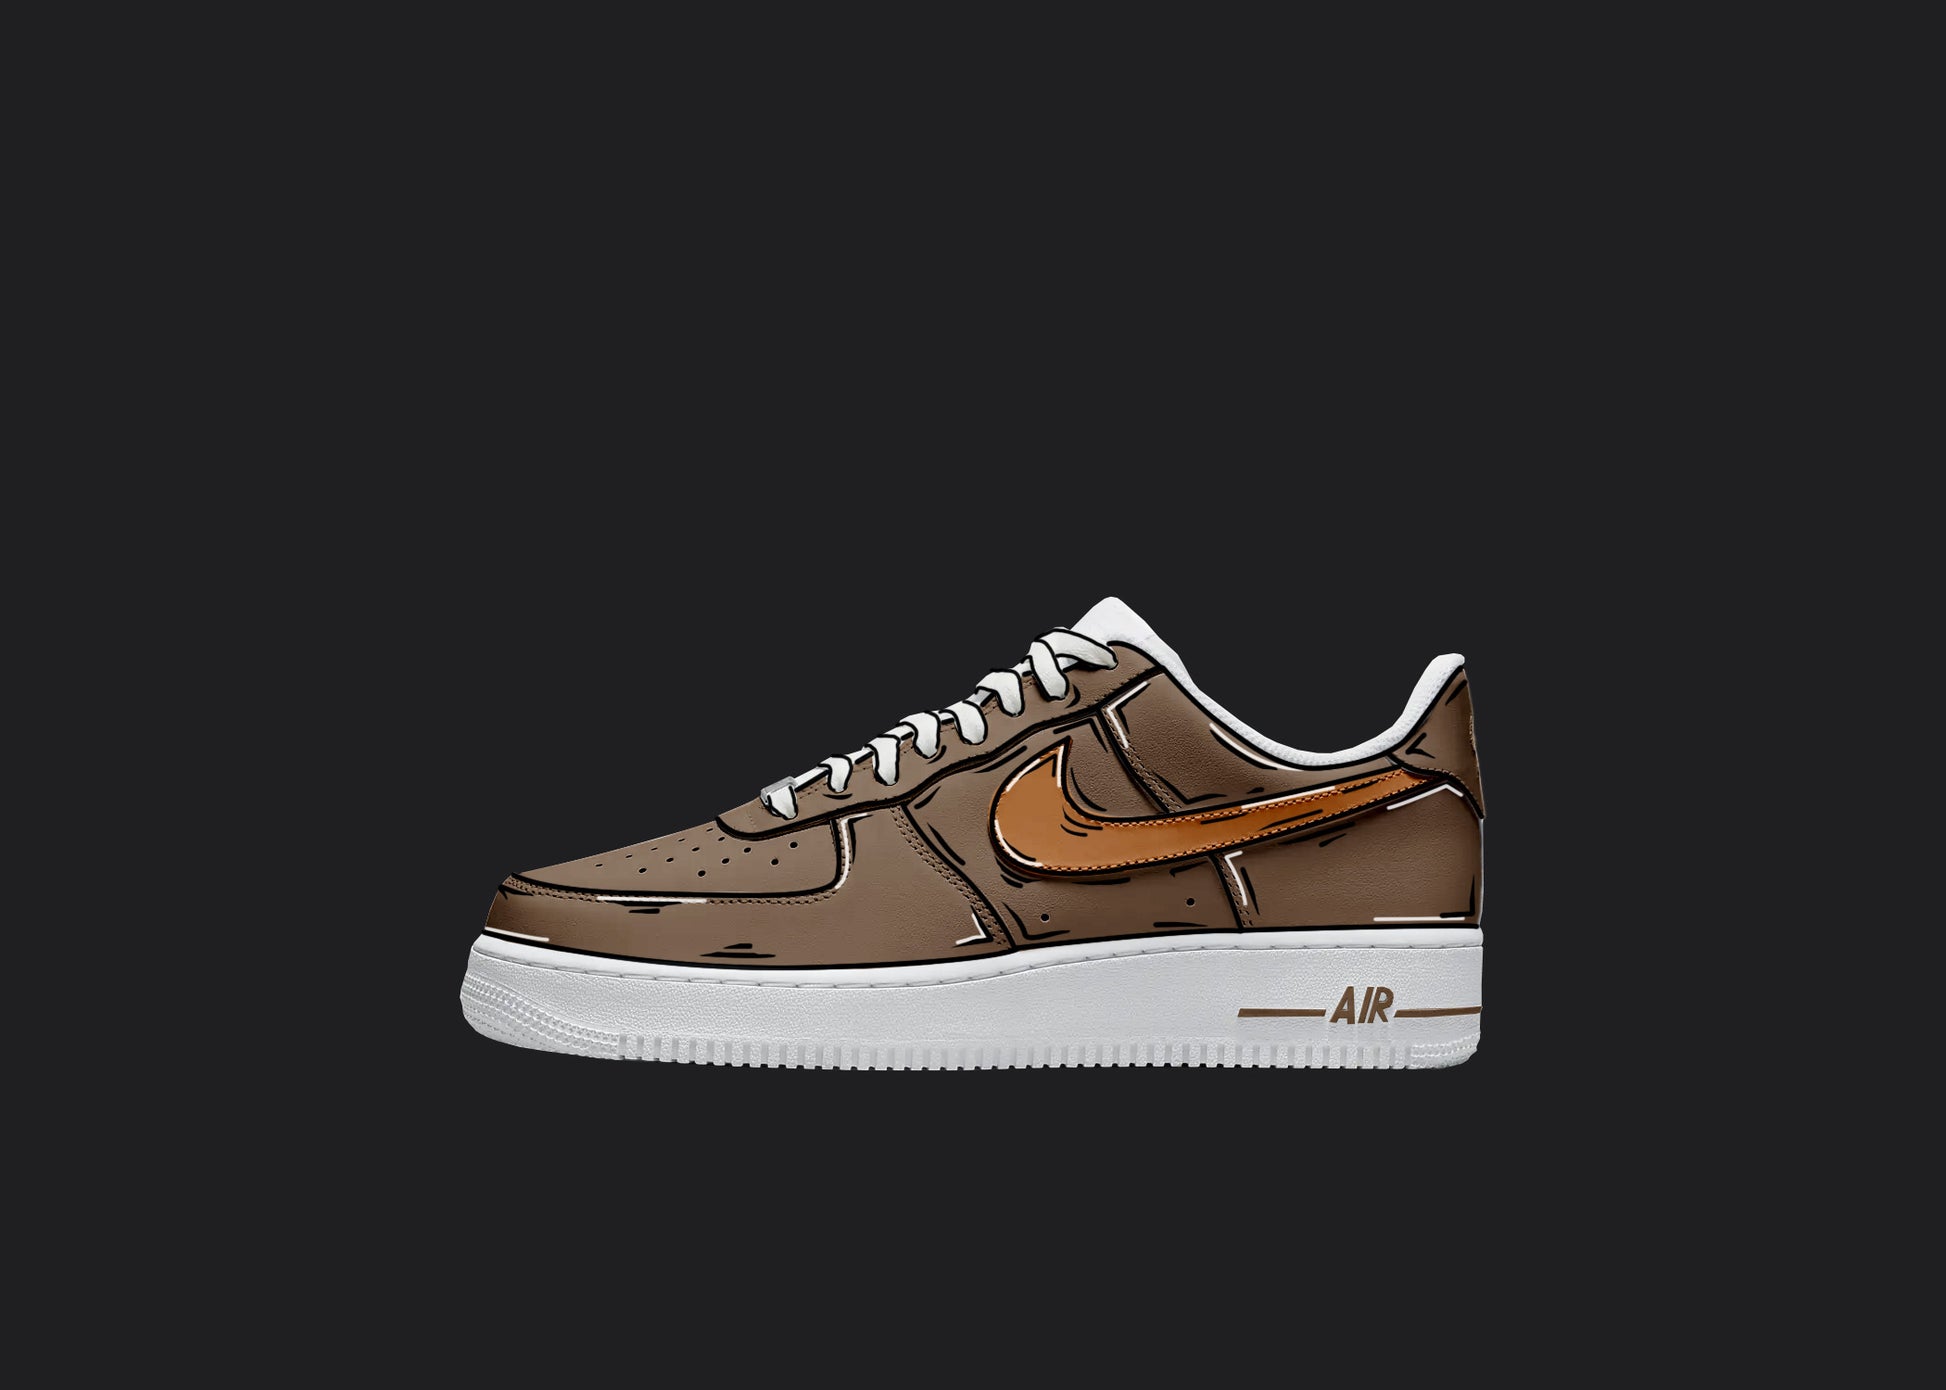 brown and orange custom air force one sneakers with cartoonish details all ove rthe shoes in white and black